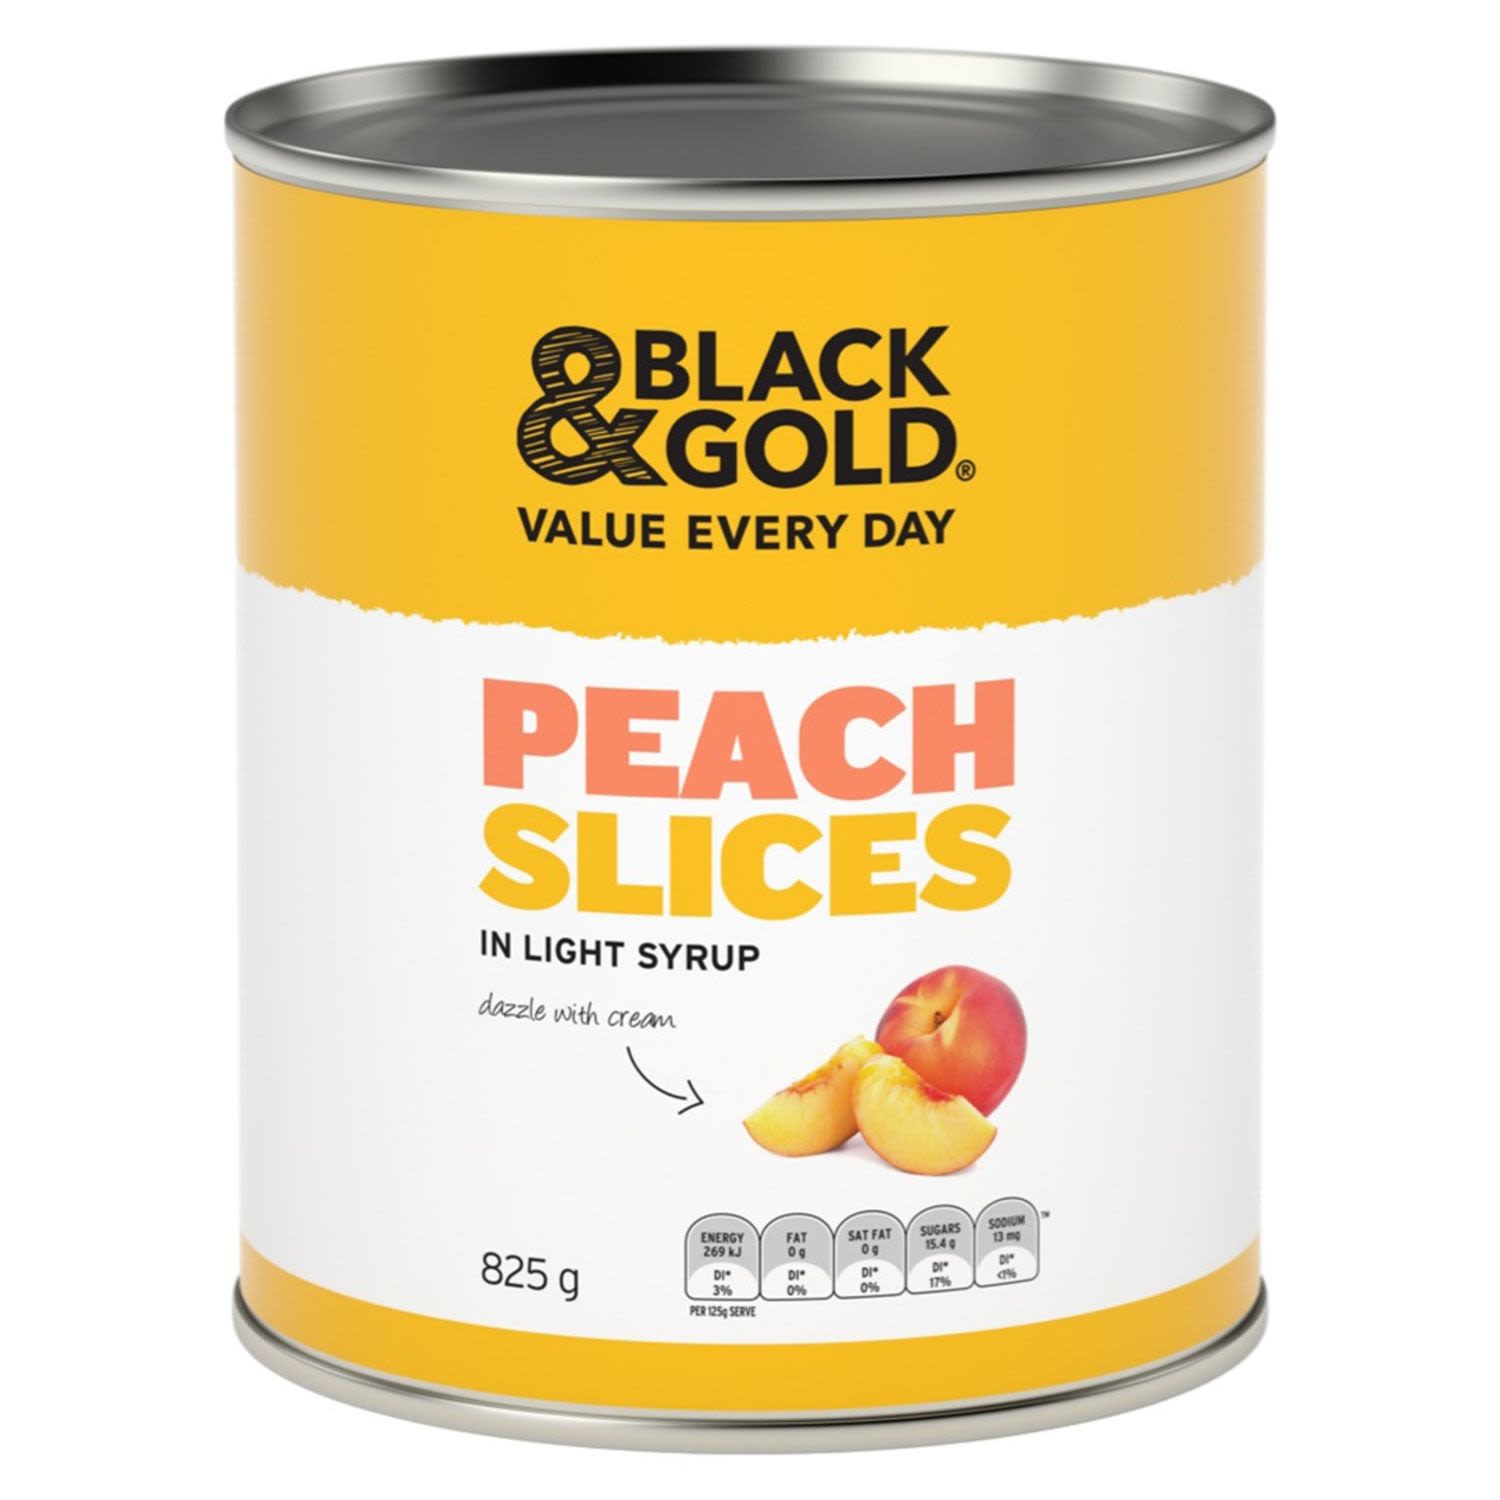 Black & Gold Peach Slices in Light Syrup, 825 Gram